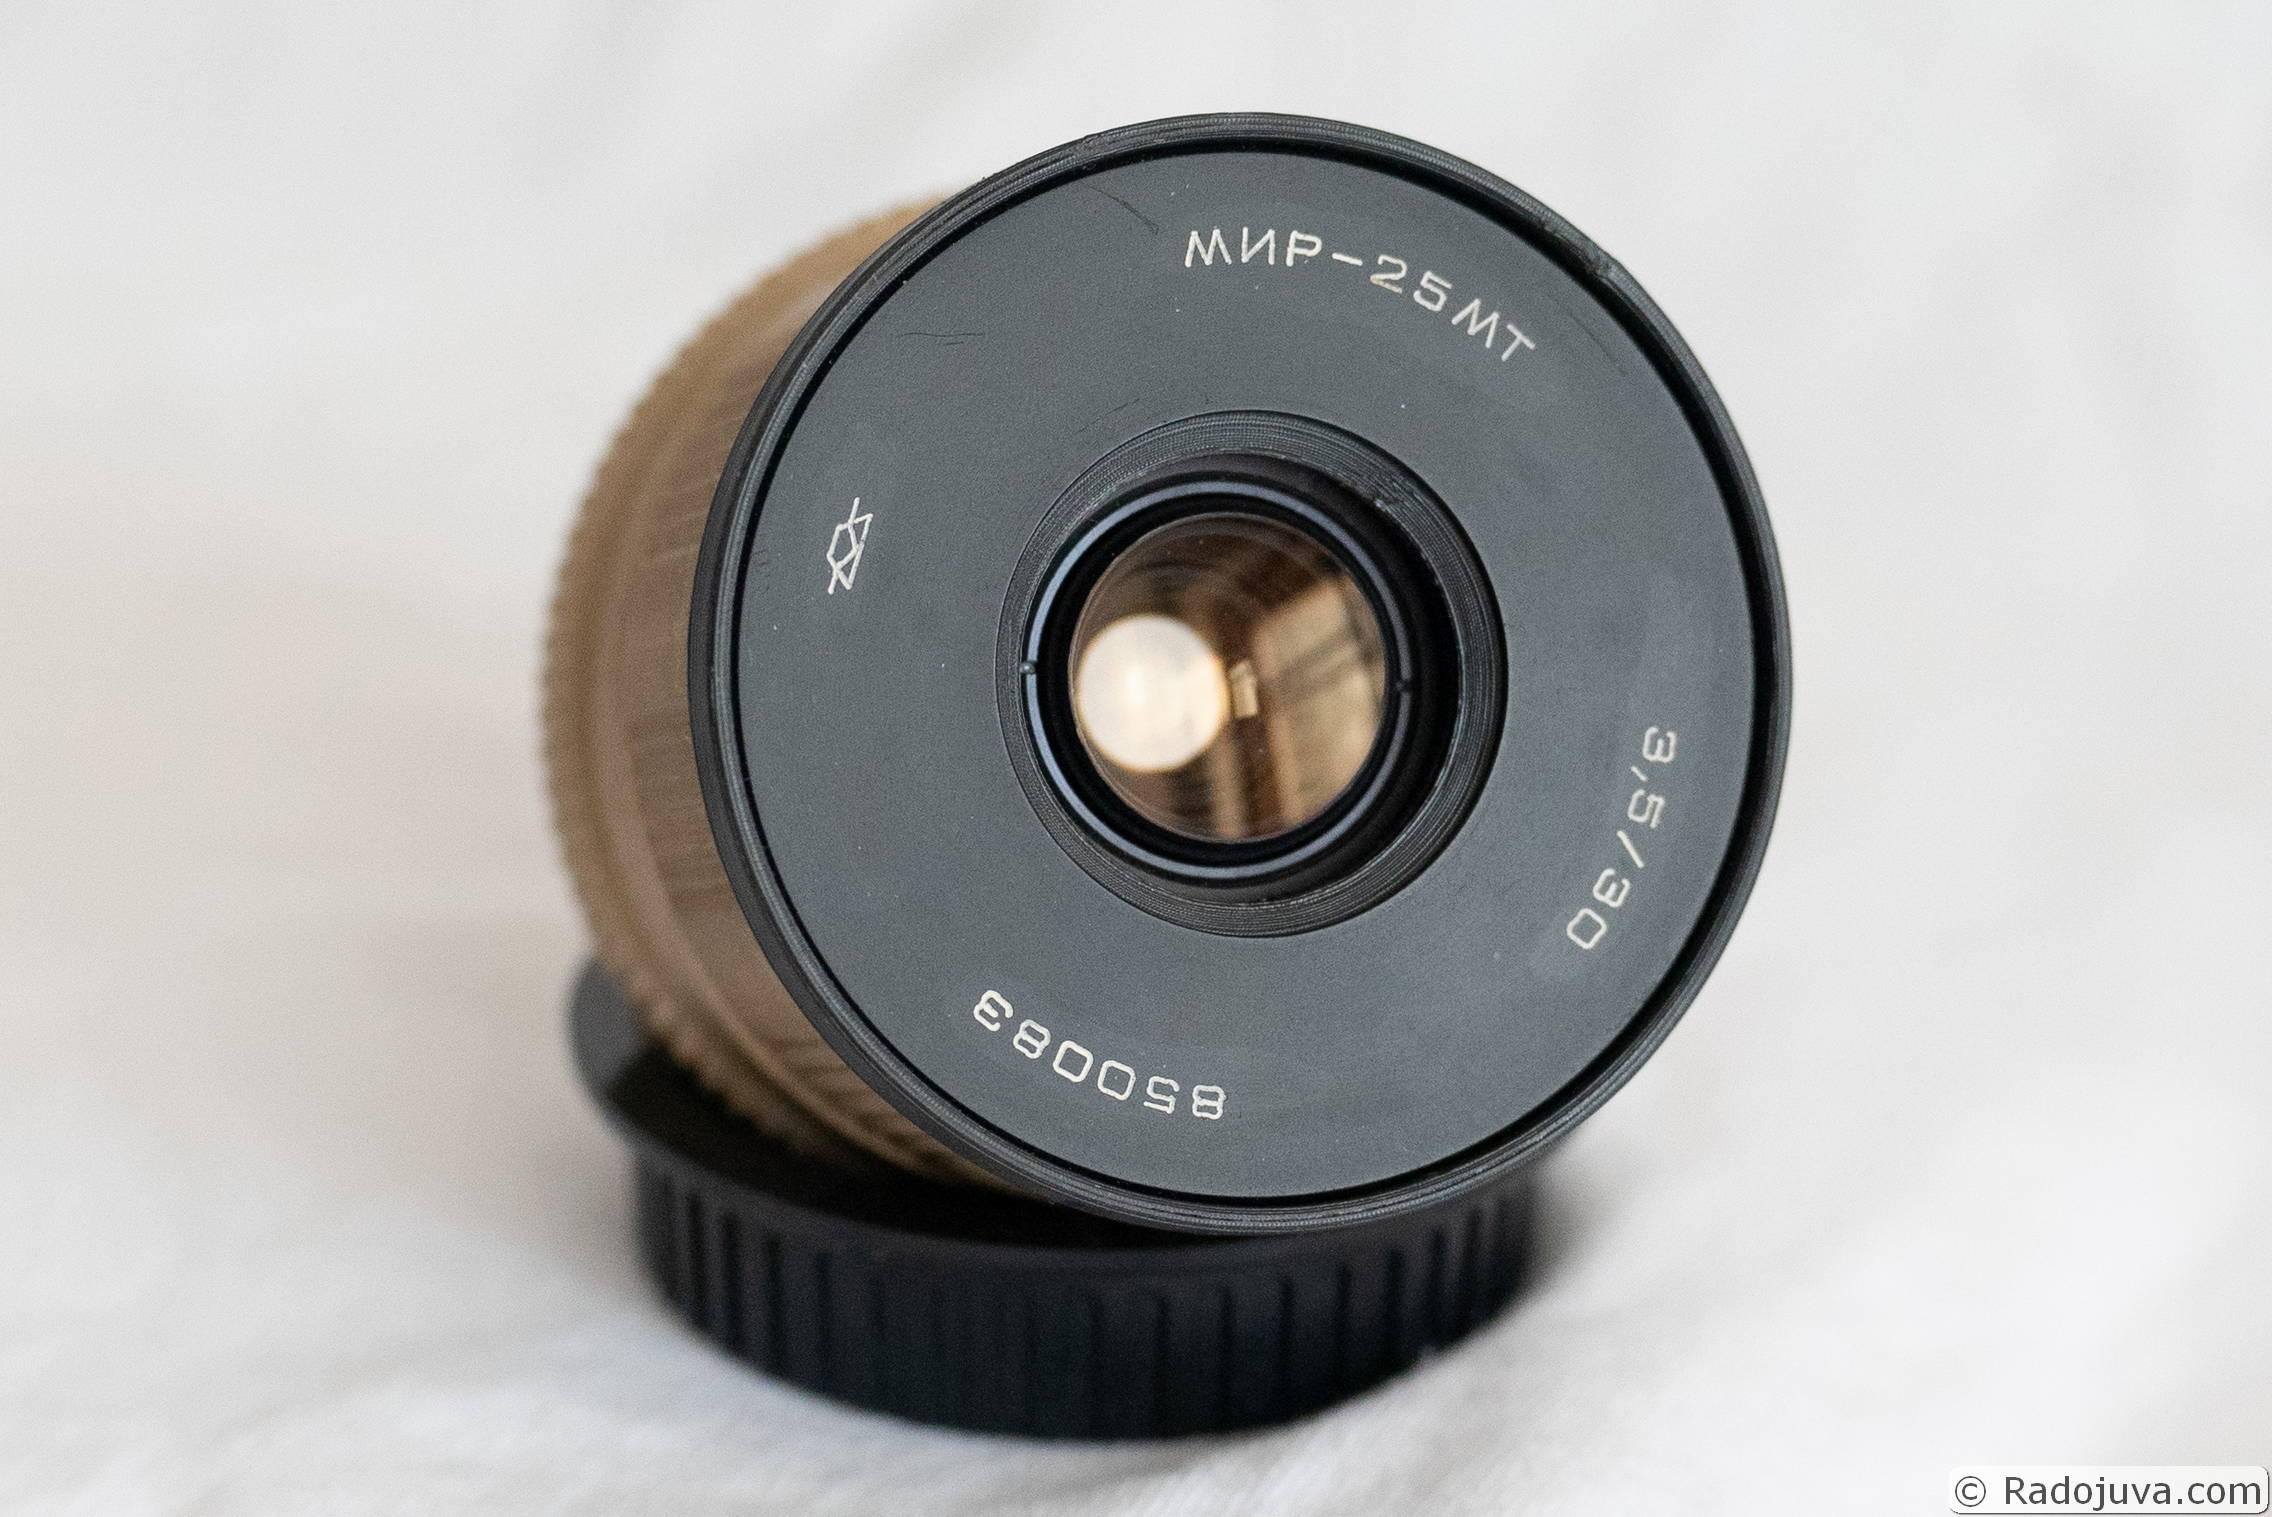 View of the adapted lens from the side of the front lens.